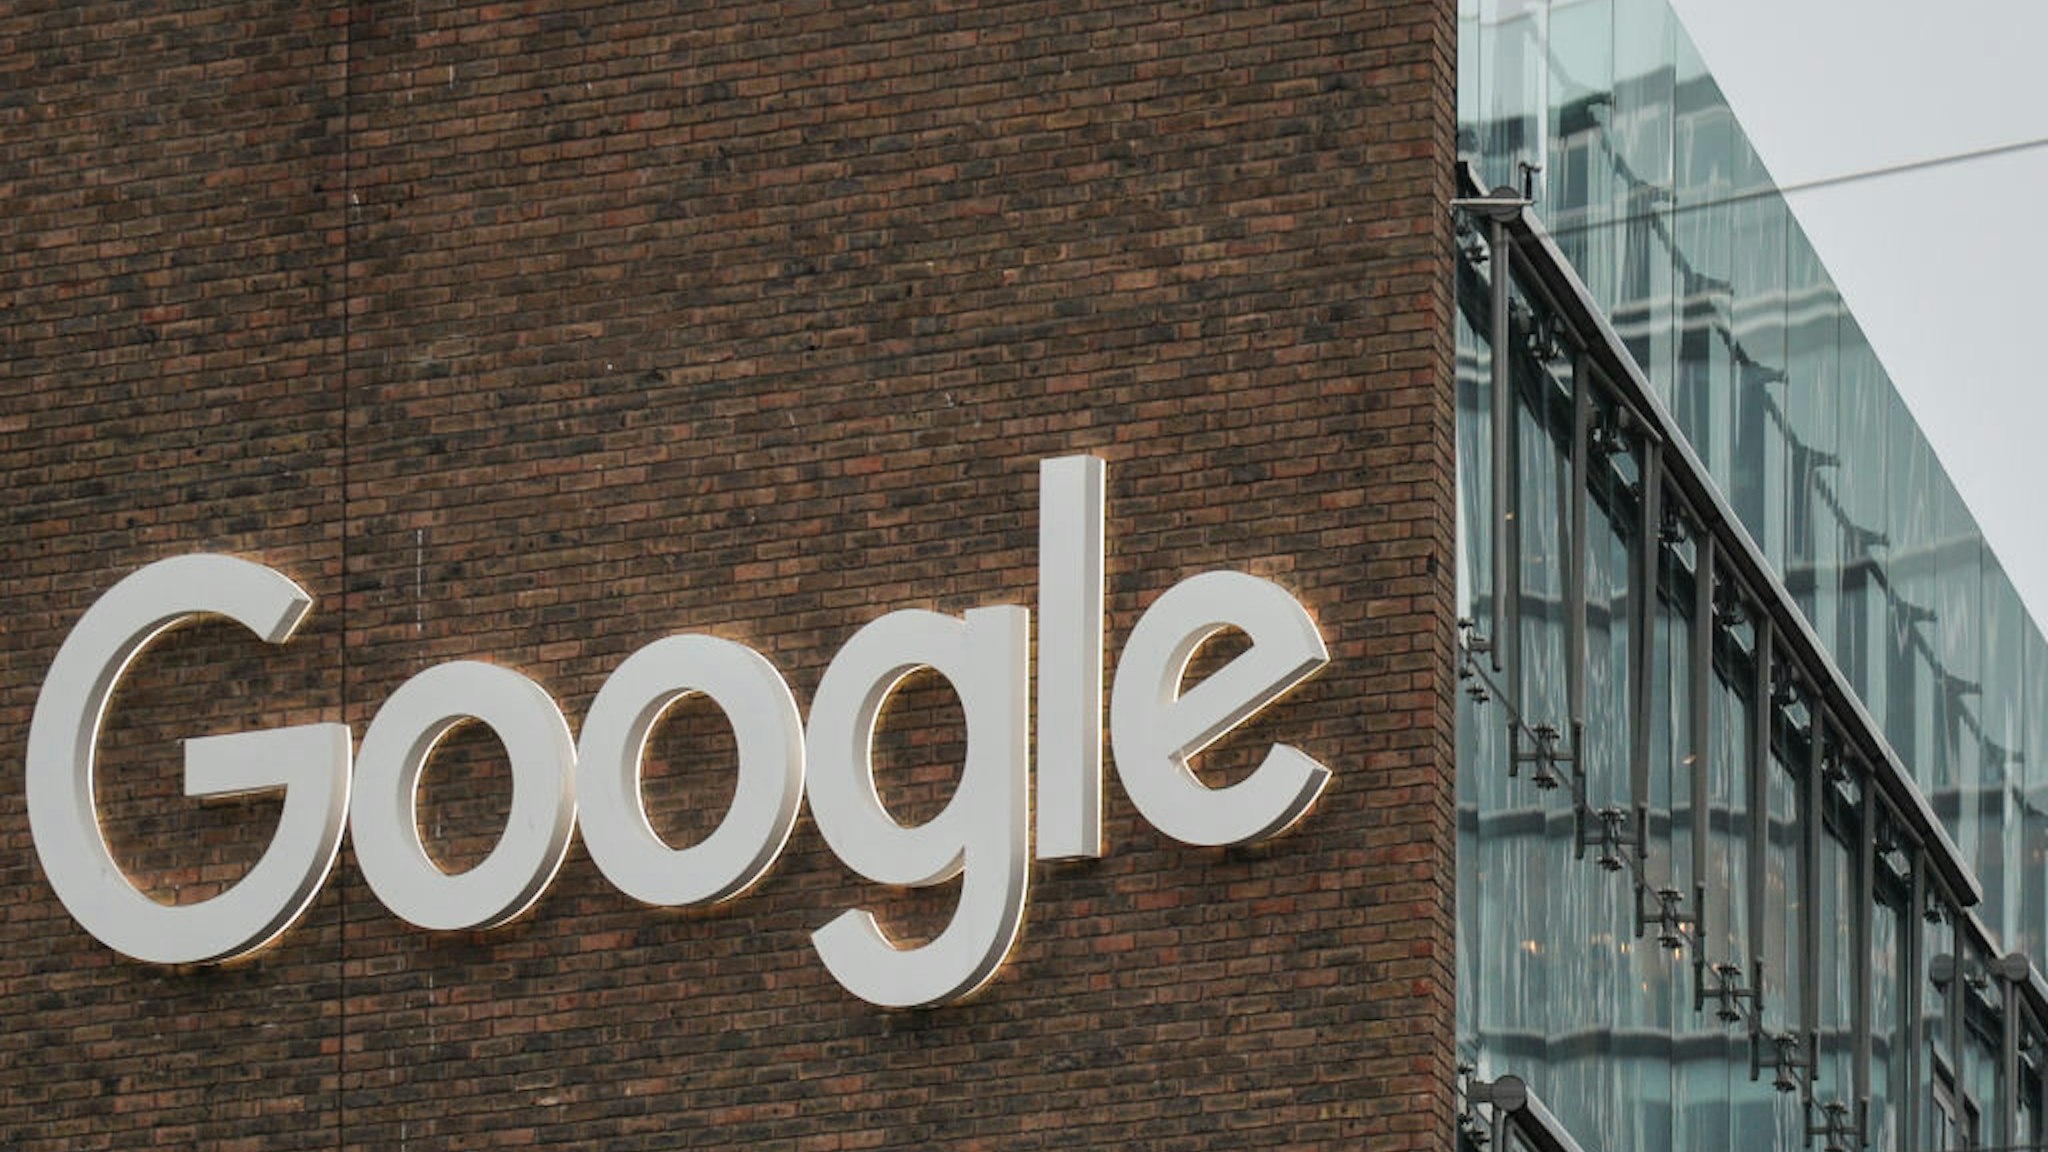 A view of Google logo on a Google building GRCQ1 in Dublin's Grand Canal area during Level 5 Covid-19 lockdown.